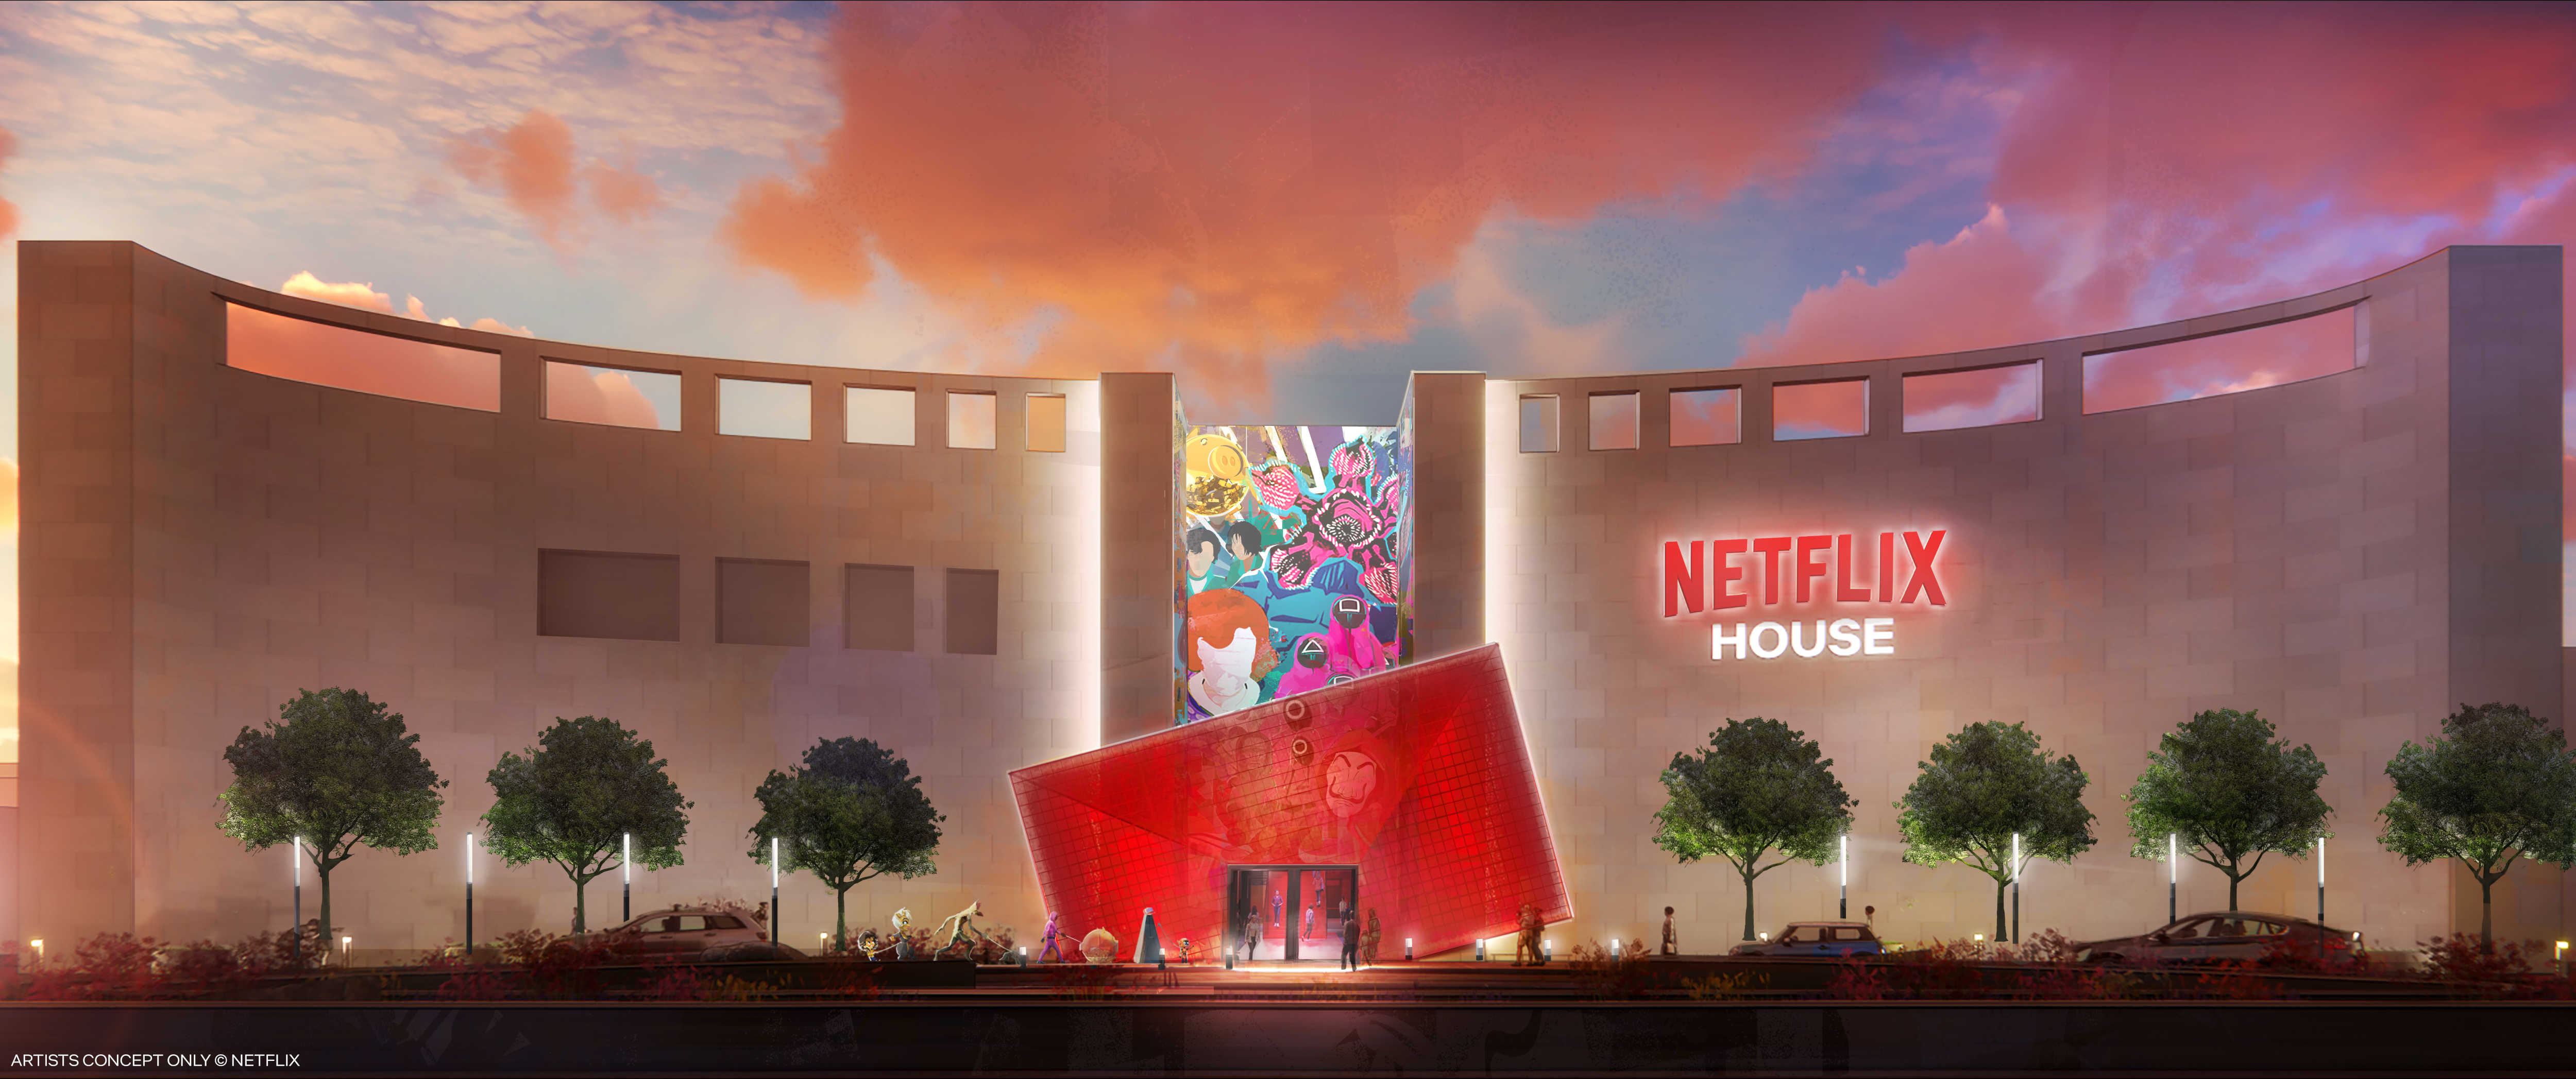 Netflix House buildings with art of the most famous series and movies from Netflix